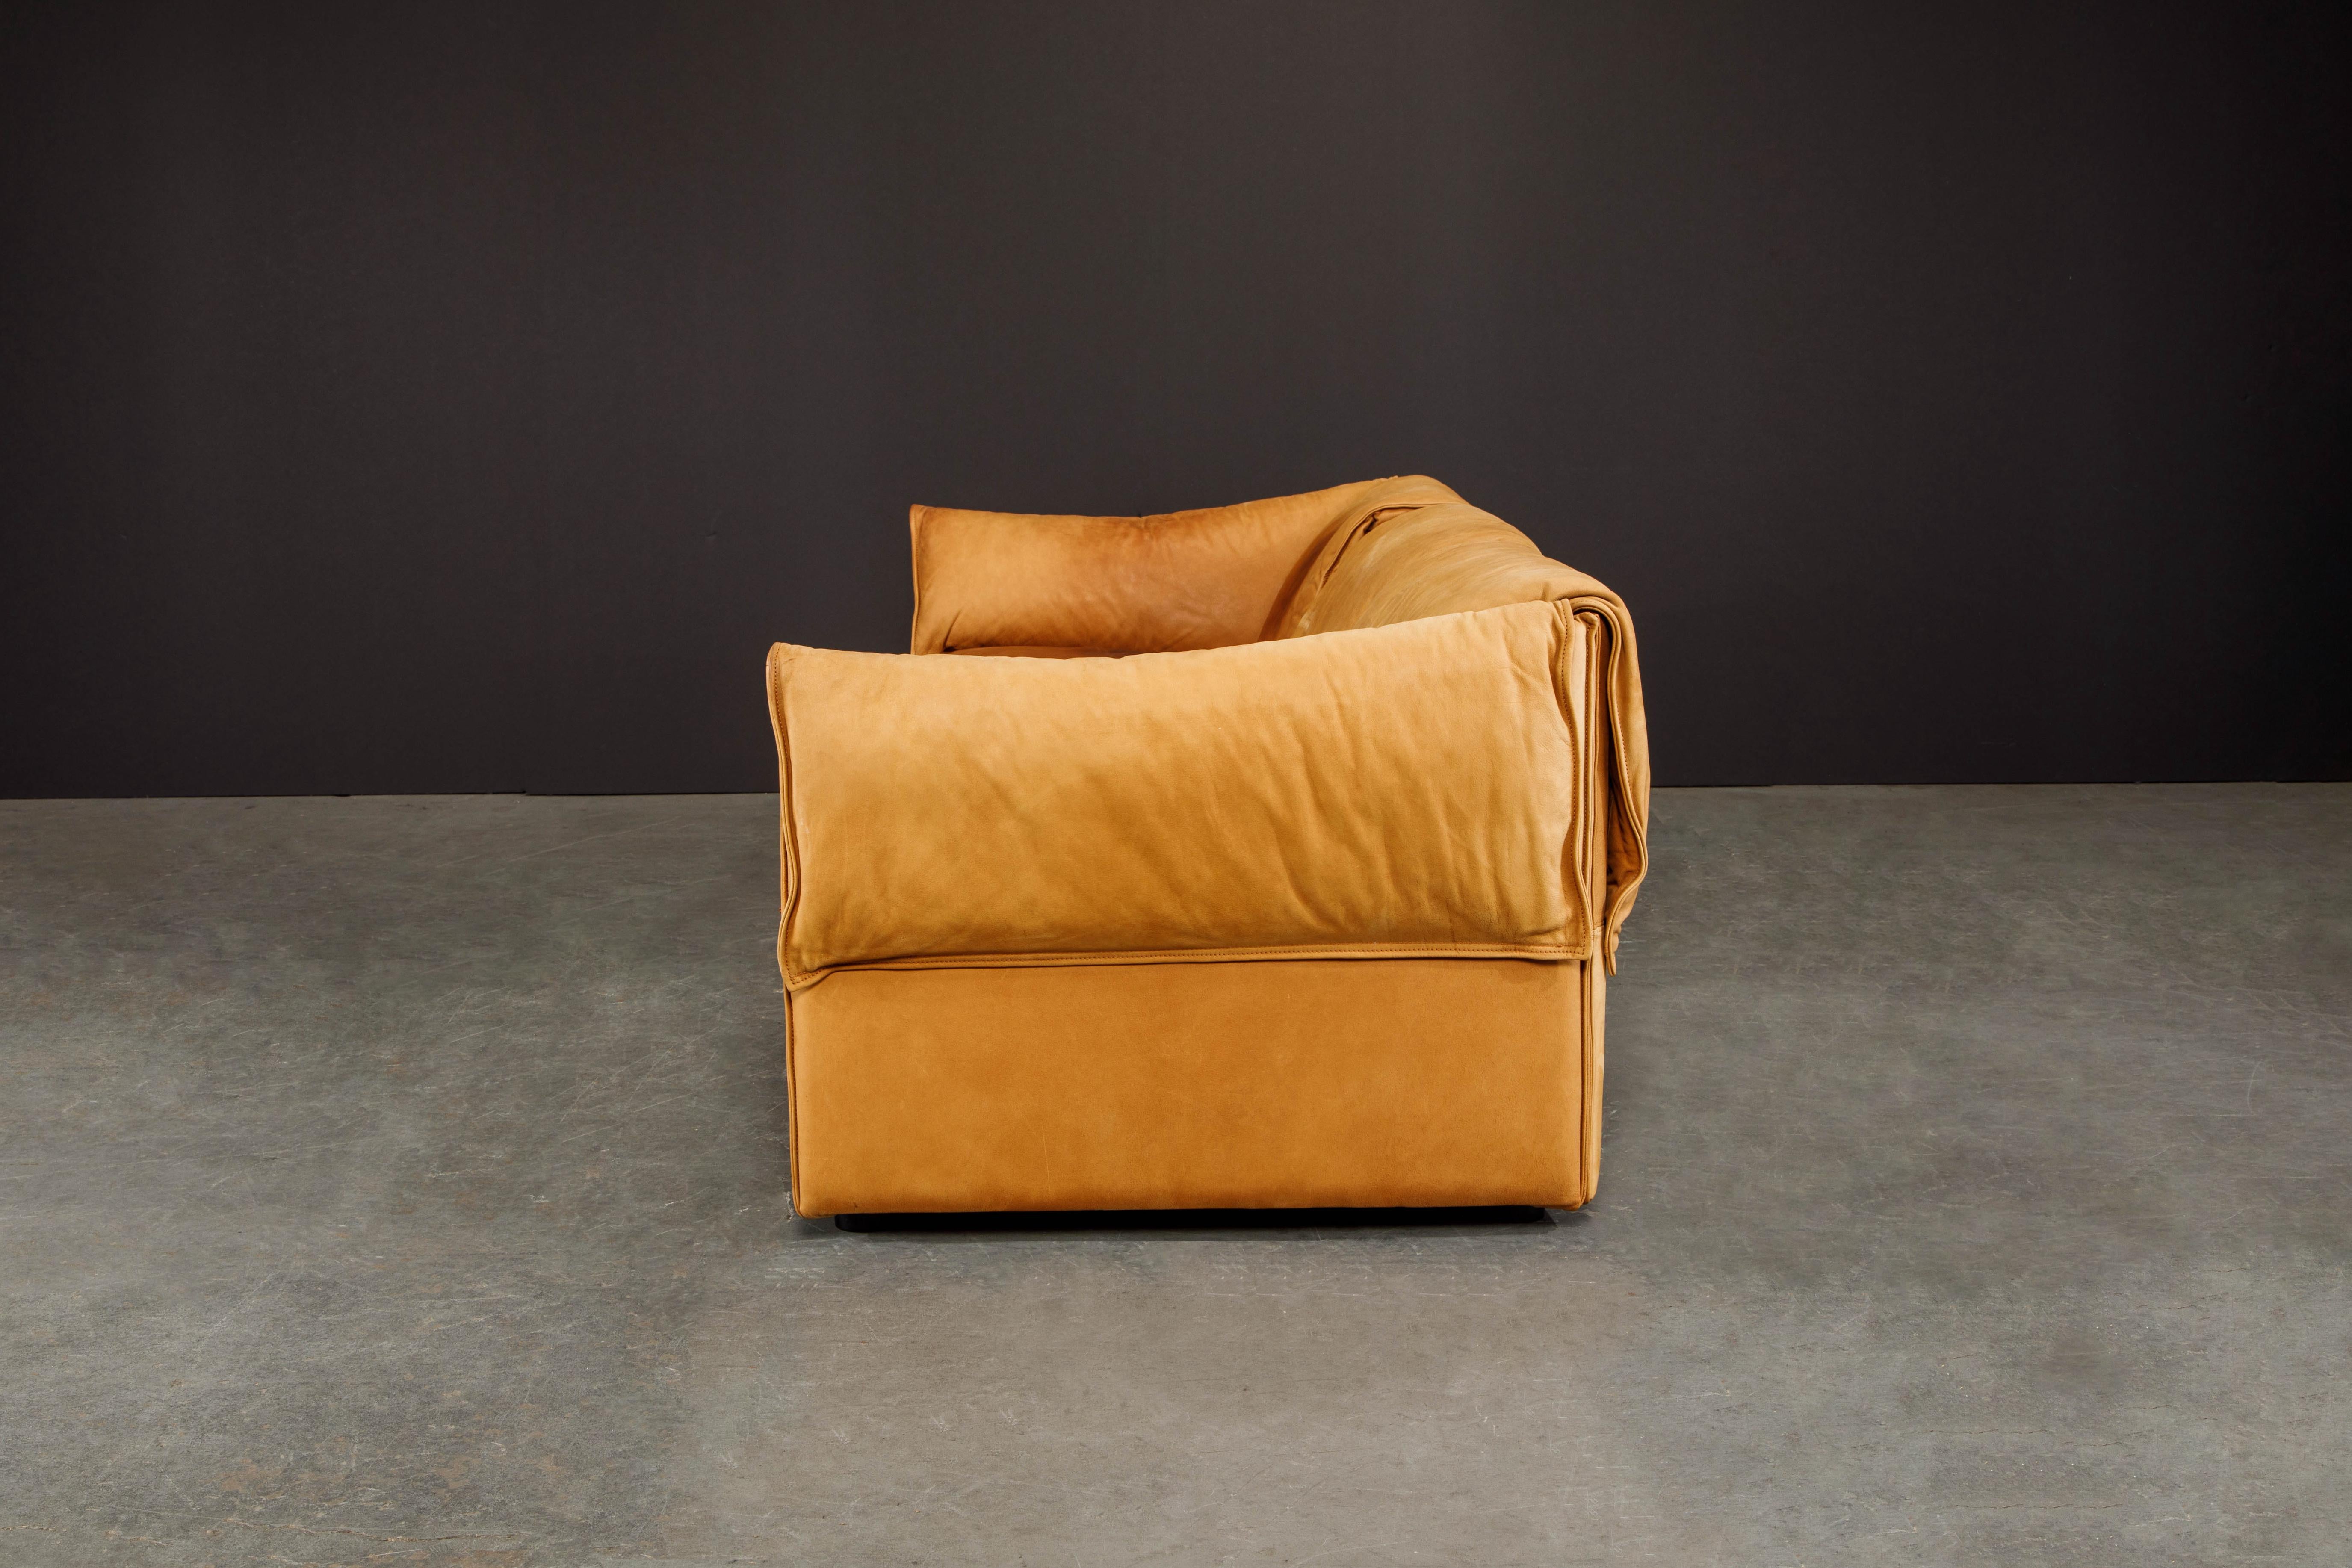 Late 20th Century 'Lotus' Leather Sofa by Niels Bendtsen for Niels Eilersen, 1970s Denmark, Signed